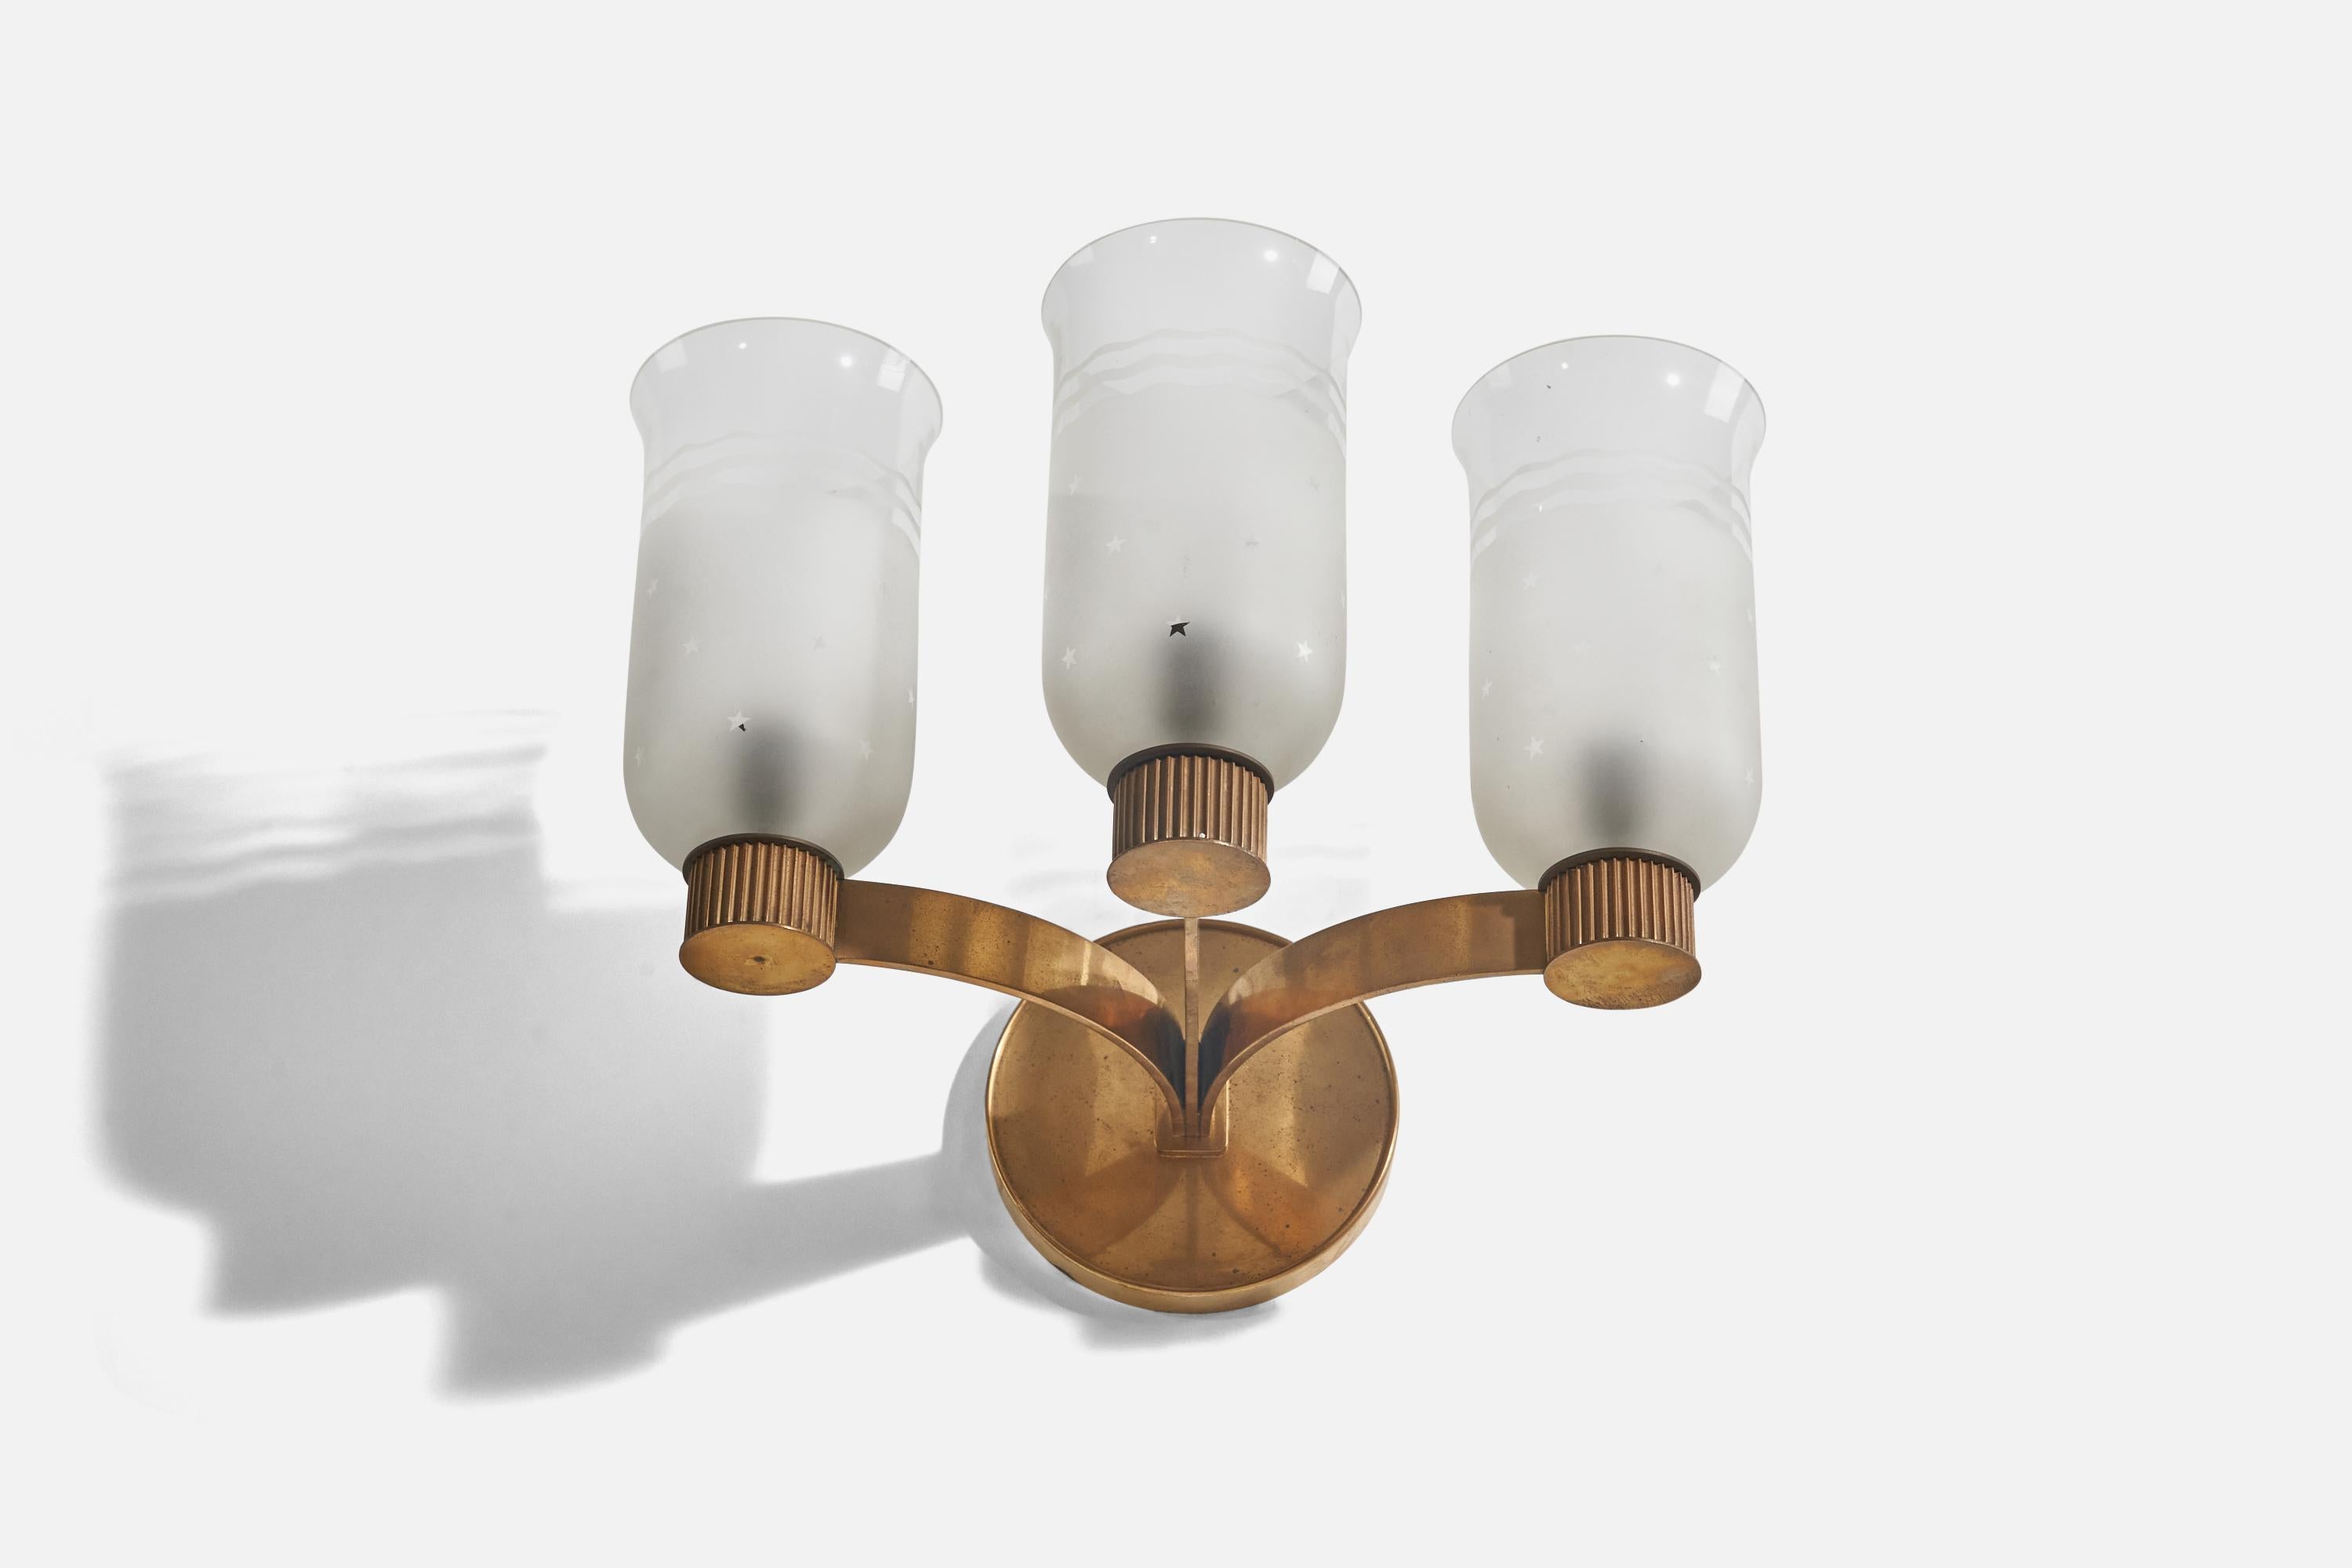 A brass and glass sconce designed and produced in Denmark, 1930s. 

Dimensions of Back Plate (inches) : 7.75 x 7.75 x 0.90 (Height x Width x Depth).

Socket takes standard E-26 medium base bulb.
There is no maximum wattage stated on the fixture.